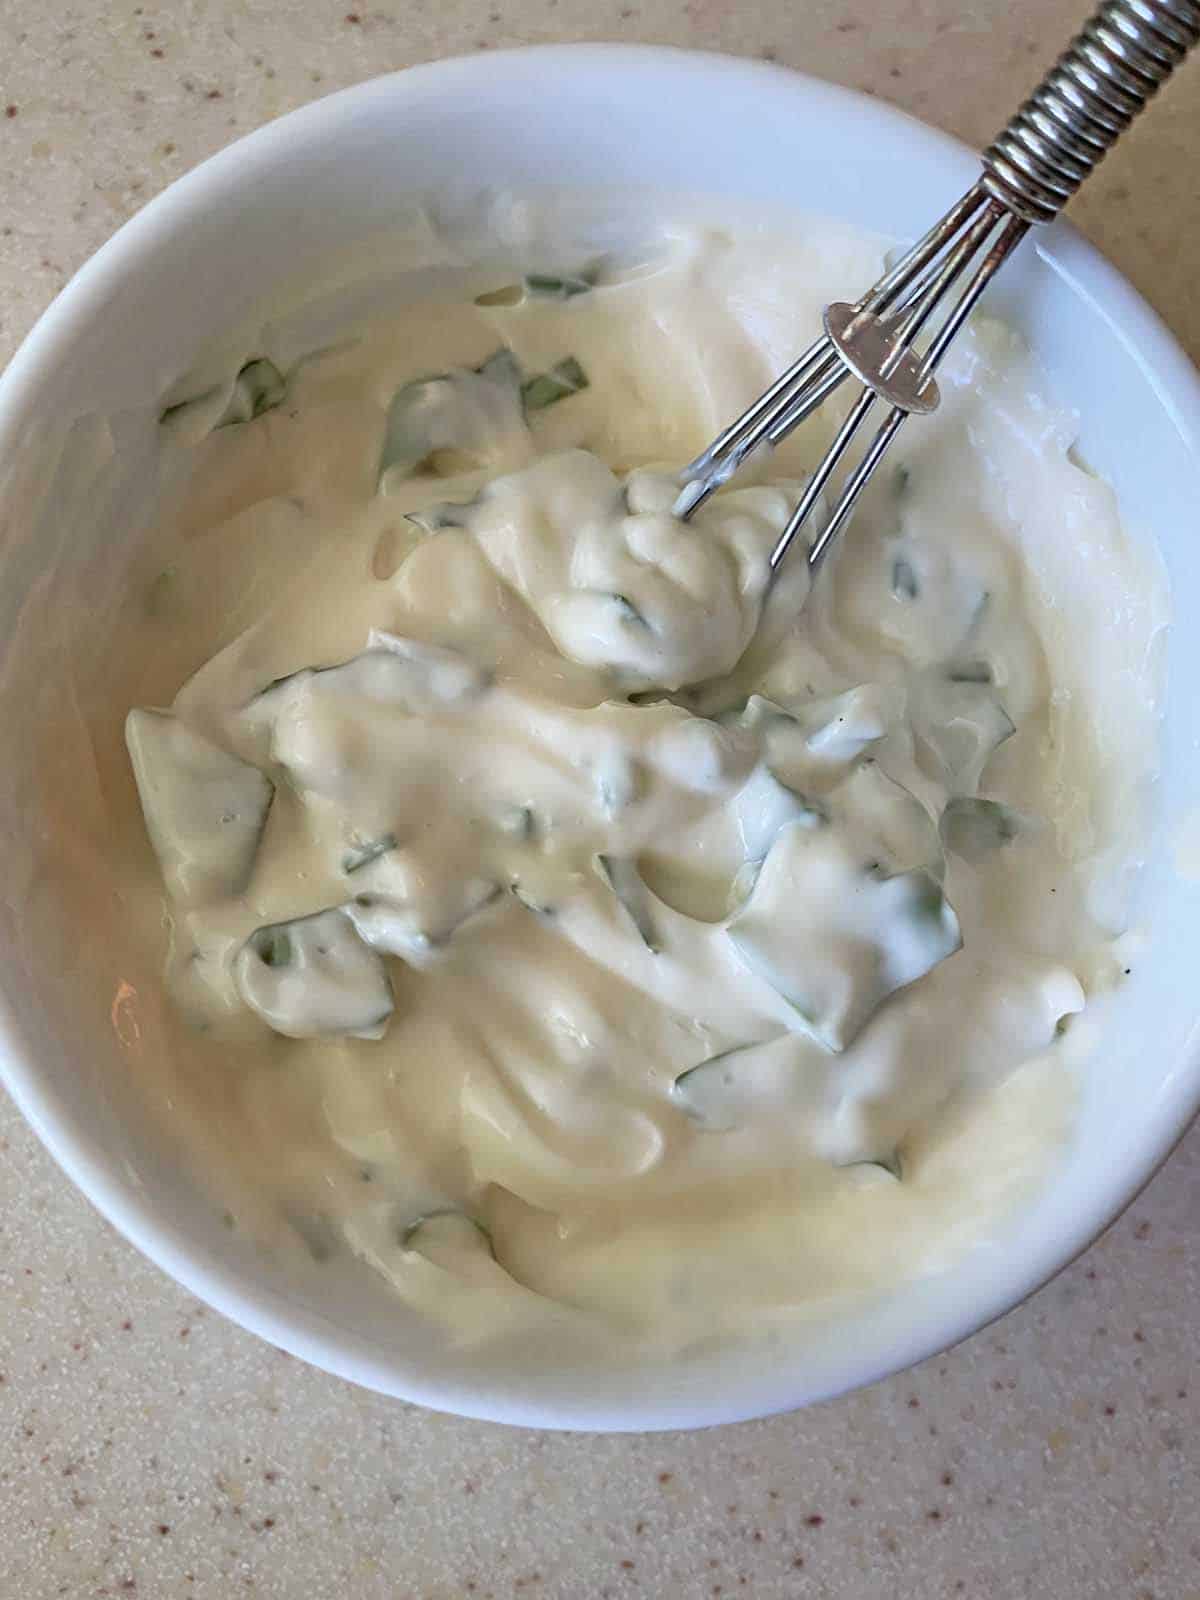 A small white bowl with basil mayonnaise and a small silver whisk to blend the ingredients.